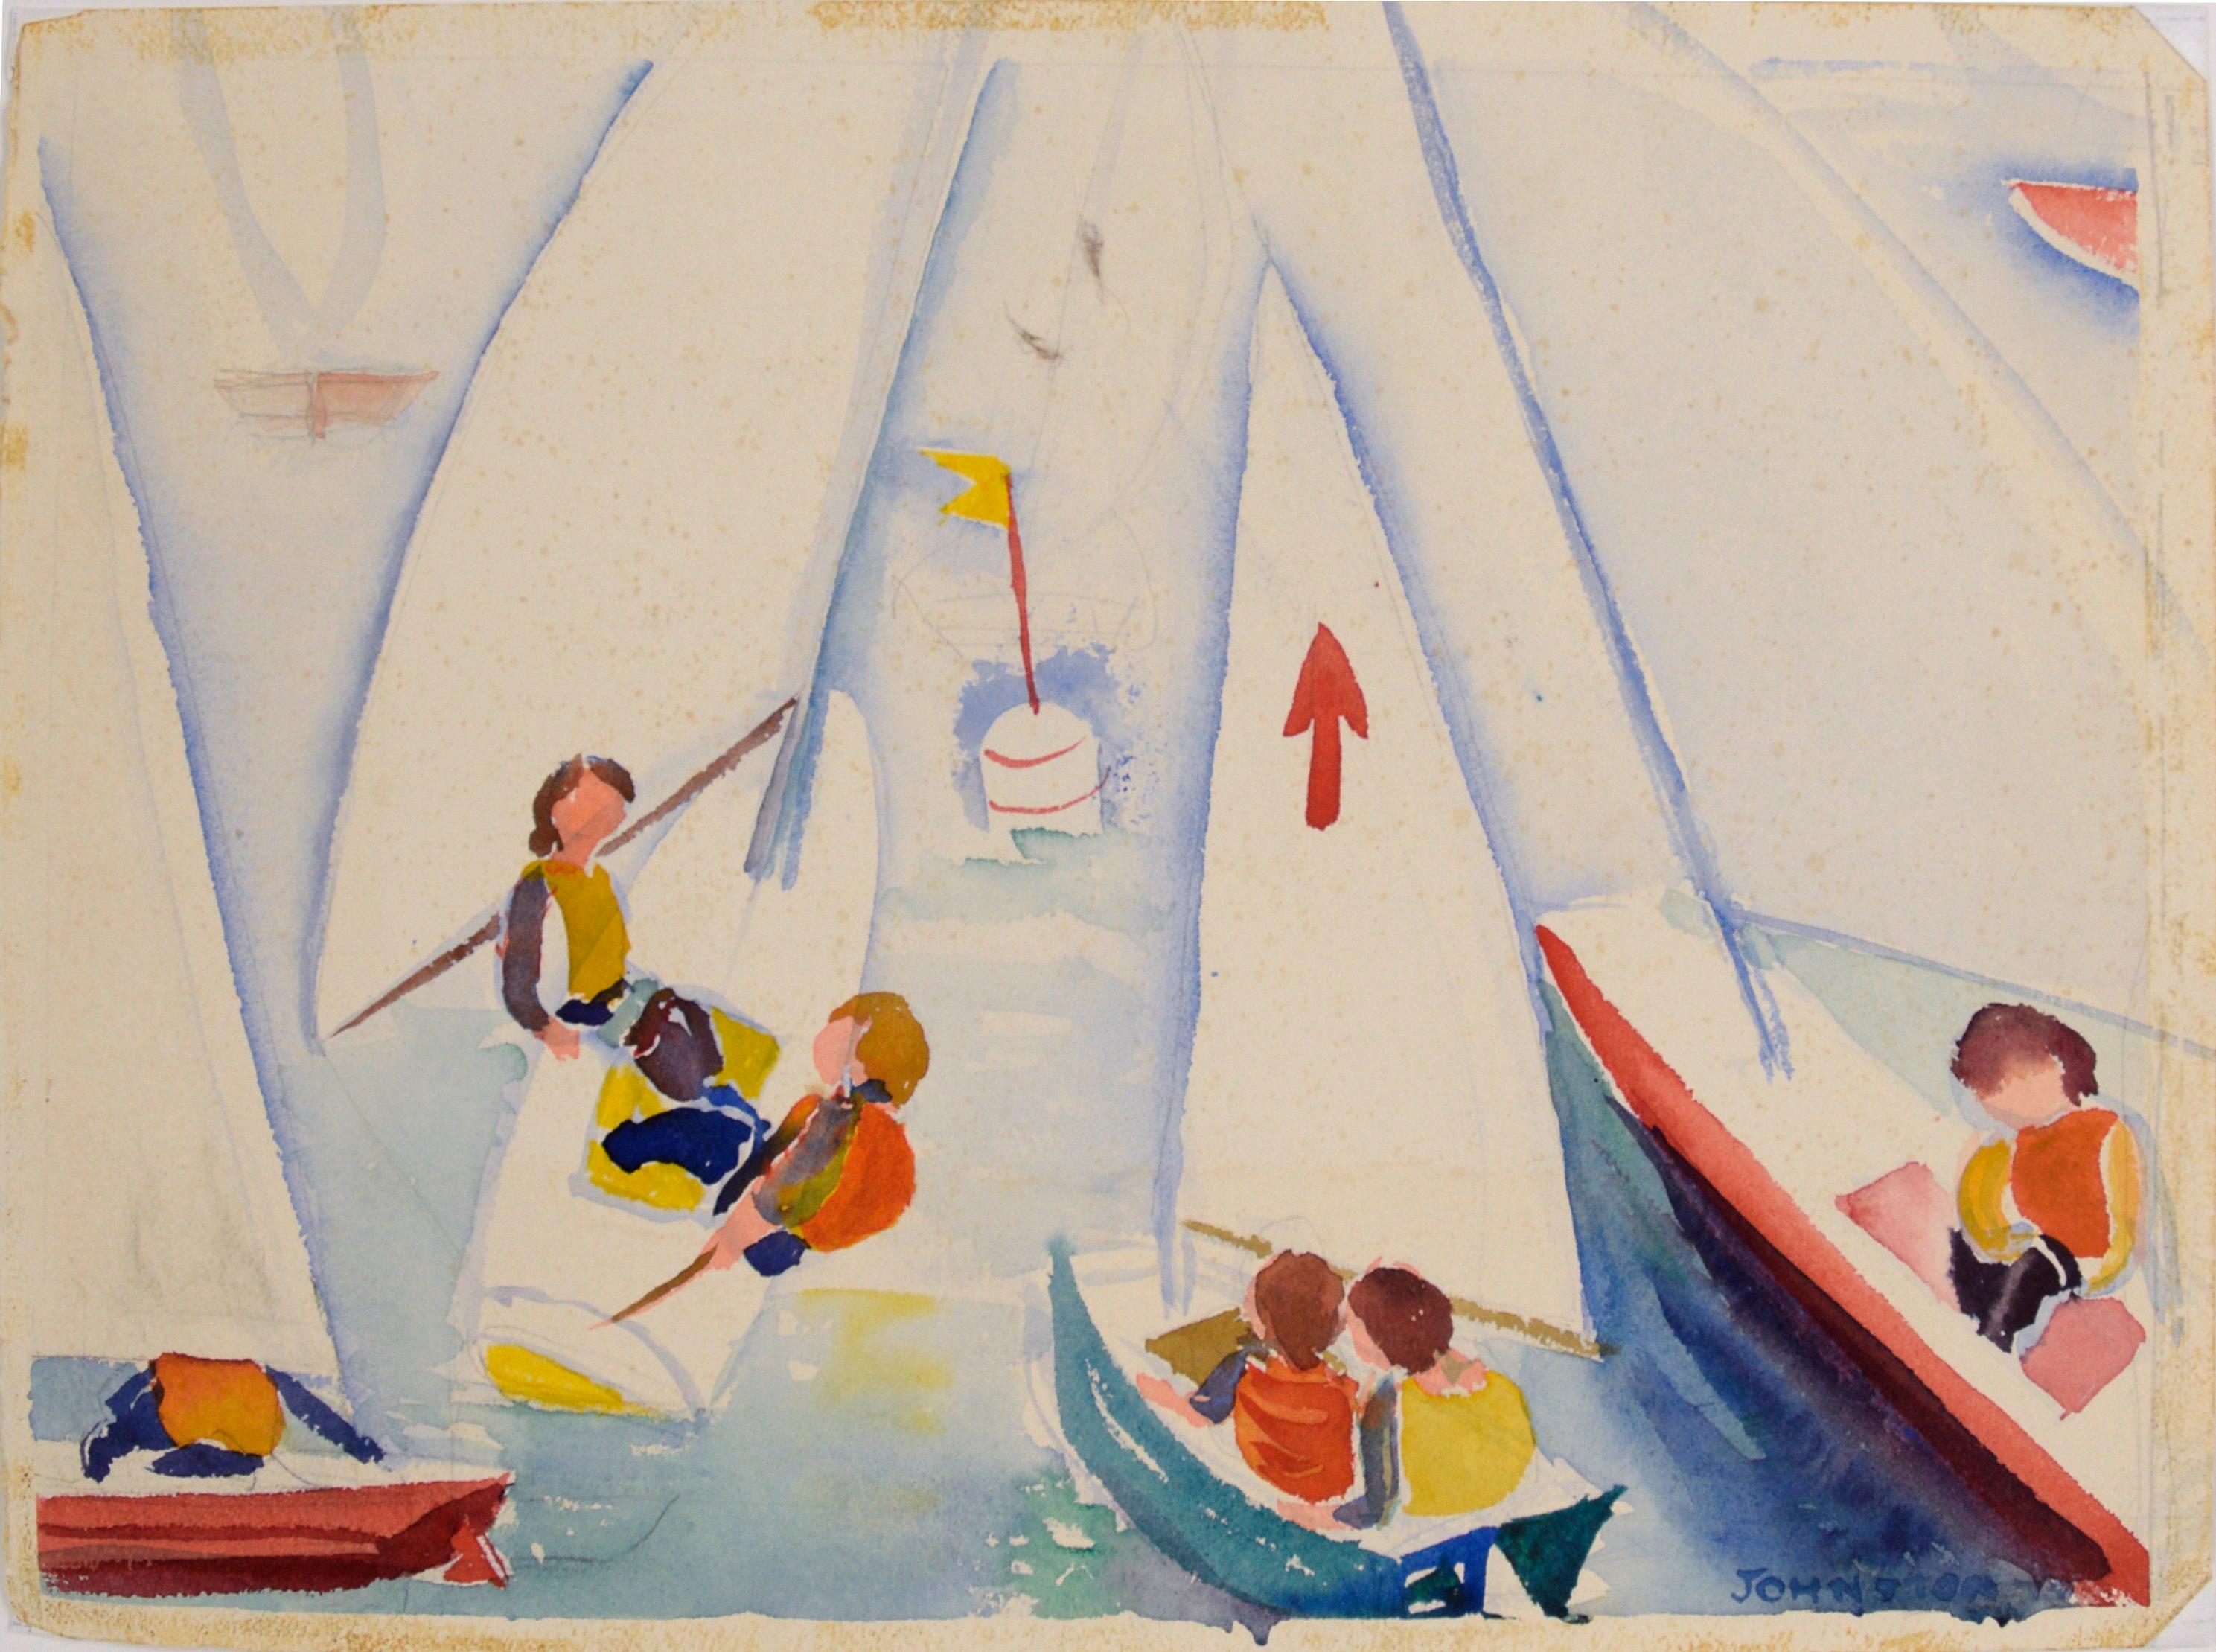 Sailboat Race Modernist Watercolor on Paper, Double-Sided Artwork

Primary colors make up four sailboats racing towards a buoy, by California artist, Lucile Marie Johnston (1907-1994, American). Double-sided watercolor with a pastel watercolor